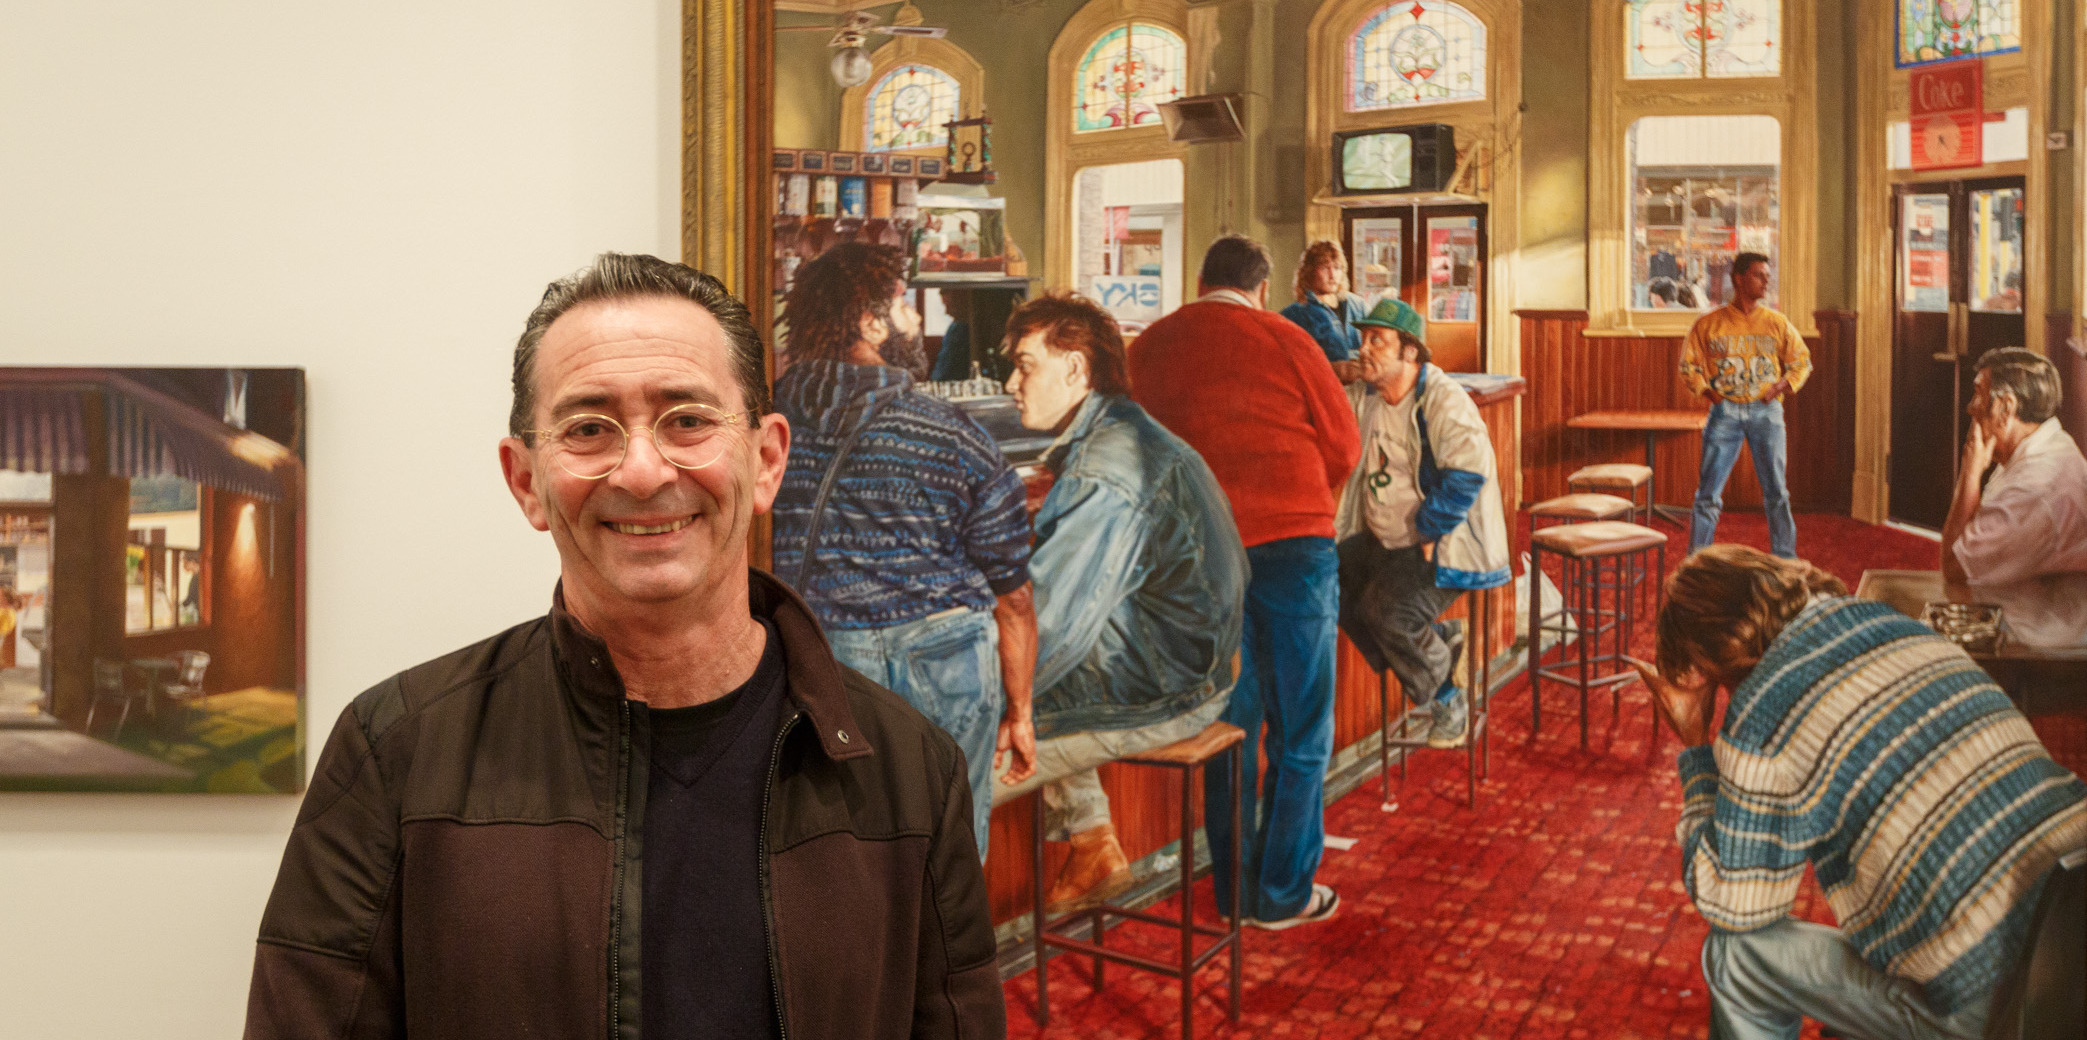 Fremantle realist painter Marcus Beilby paints intimate moments between lovers, friends, colleagues and strangers in iconic Fremantle locations.